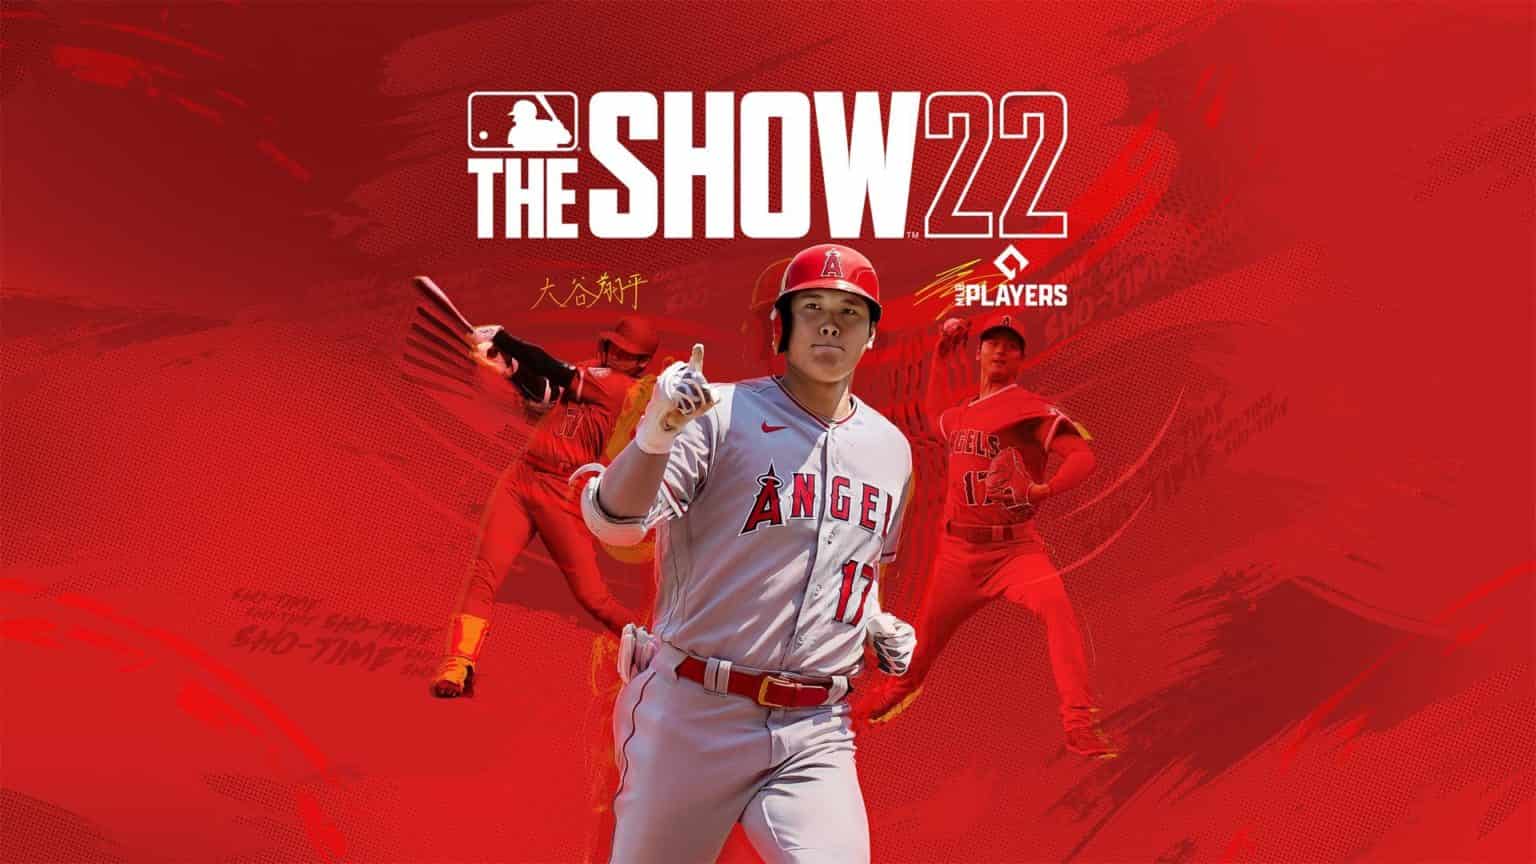 MLB The Show 22 On PS5 To Feature 4K, Targeted 60 FPS & New Stadium